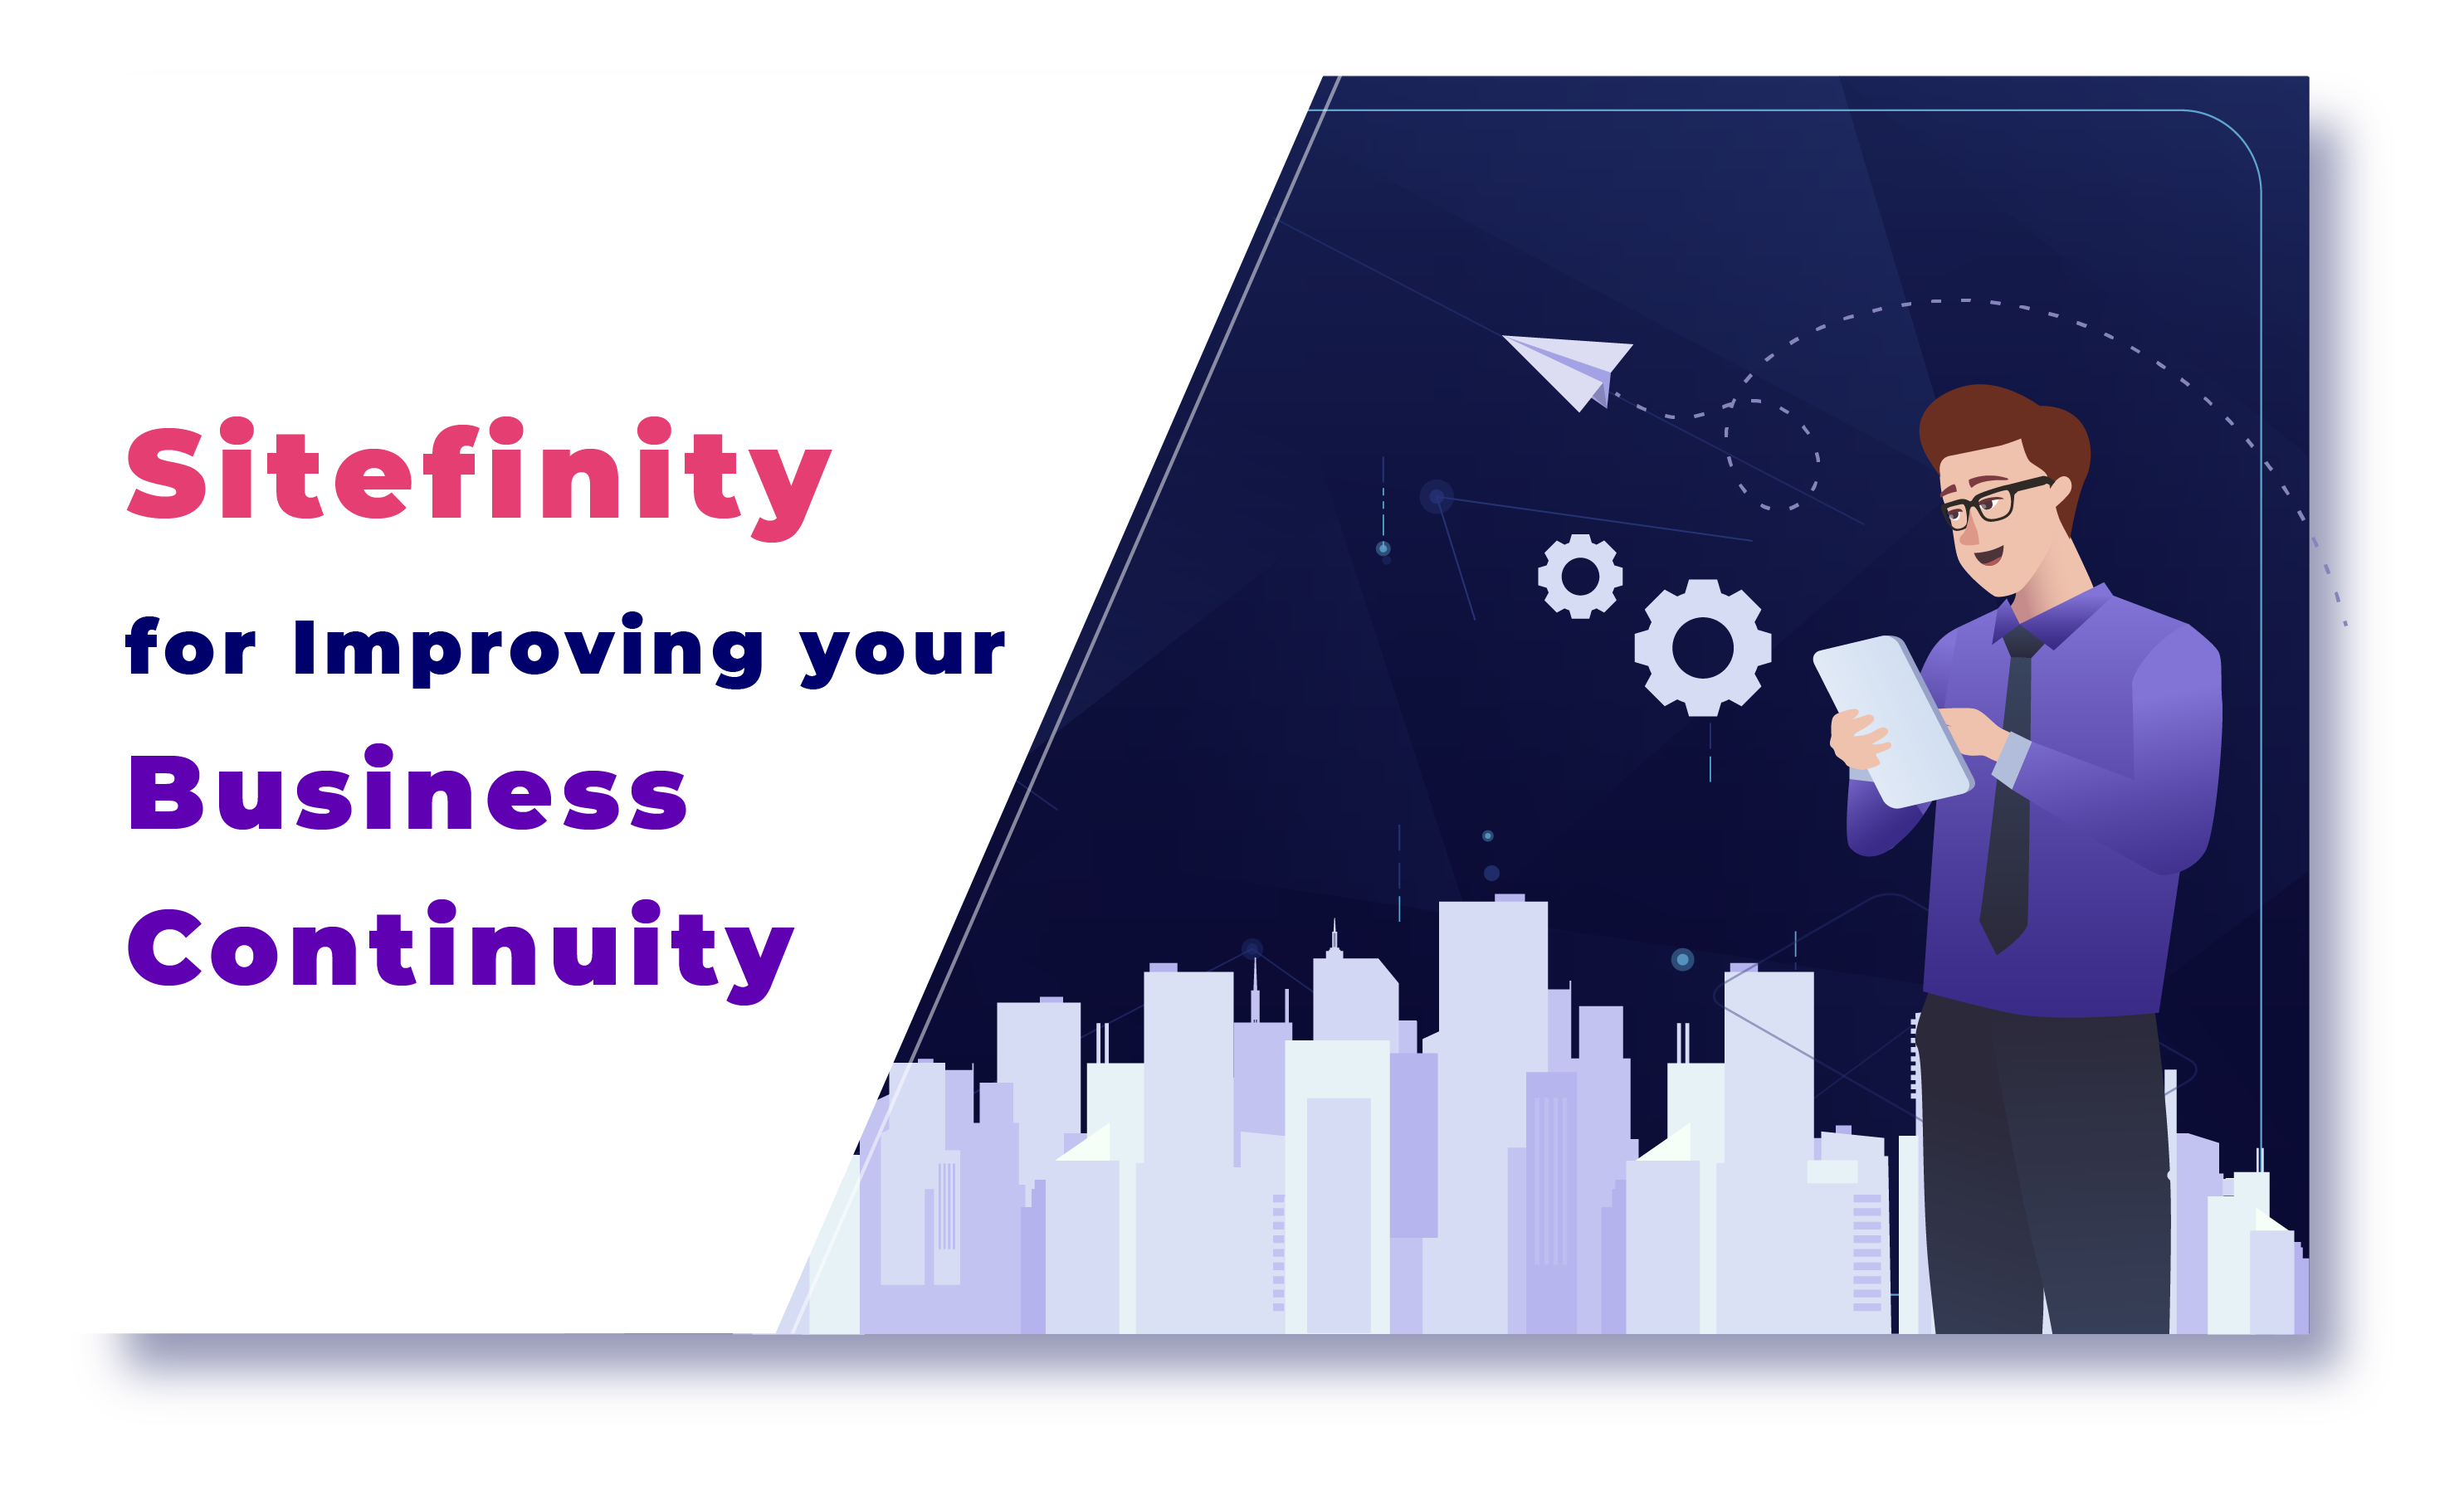 Enhance your Business Continuity with Sitefinity